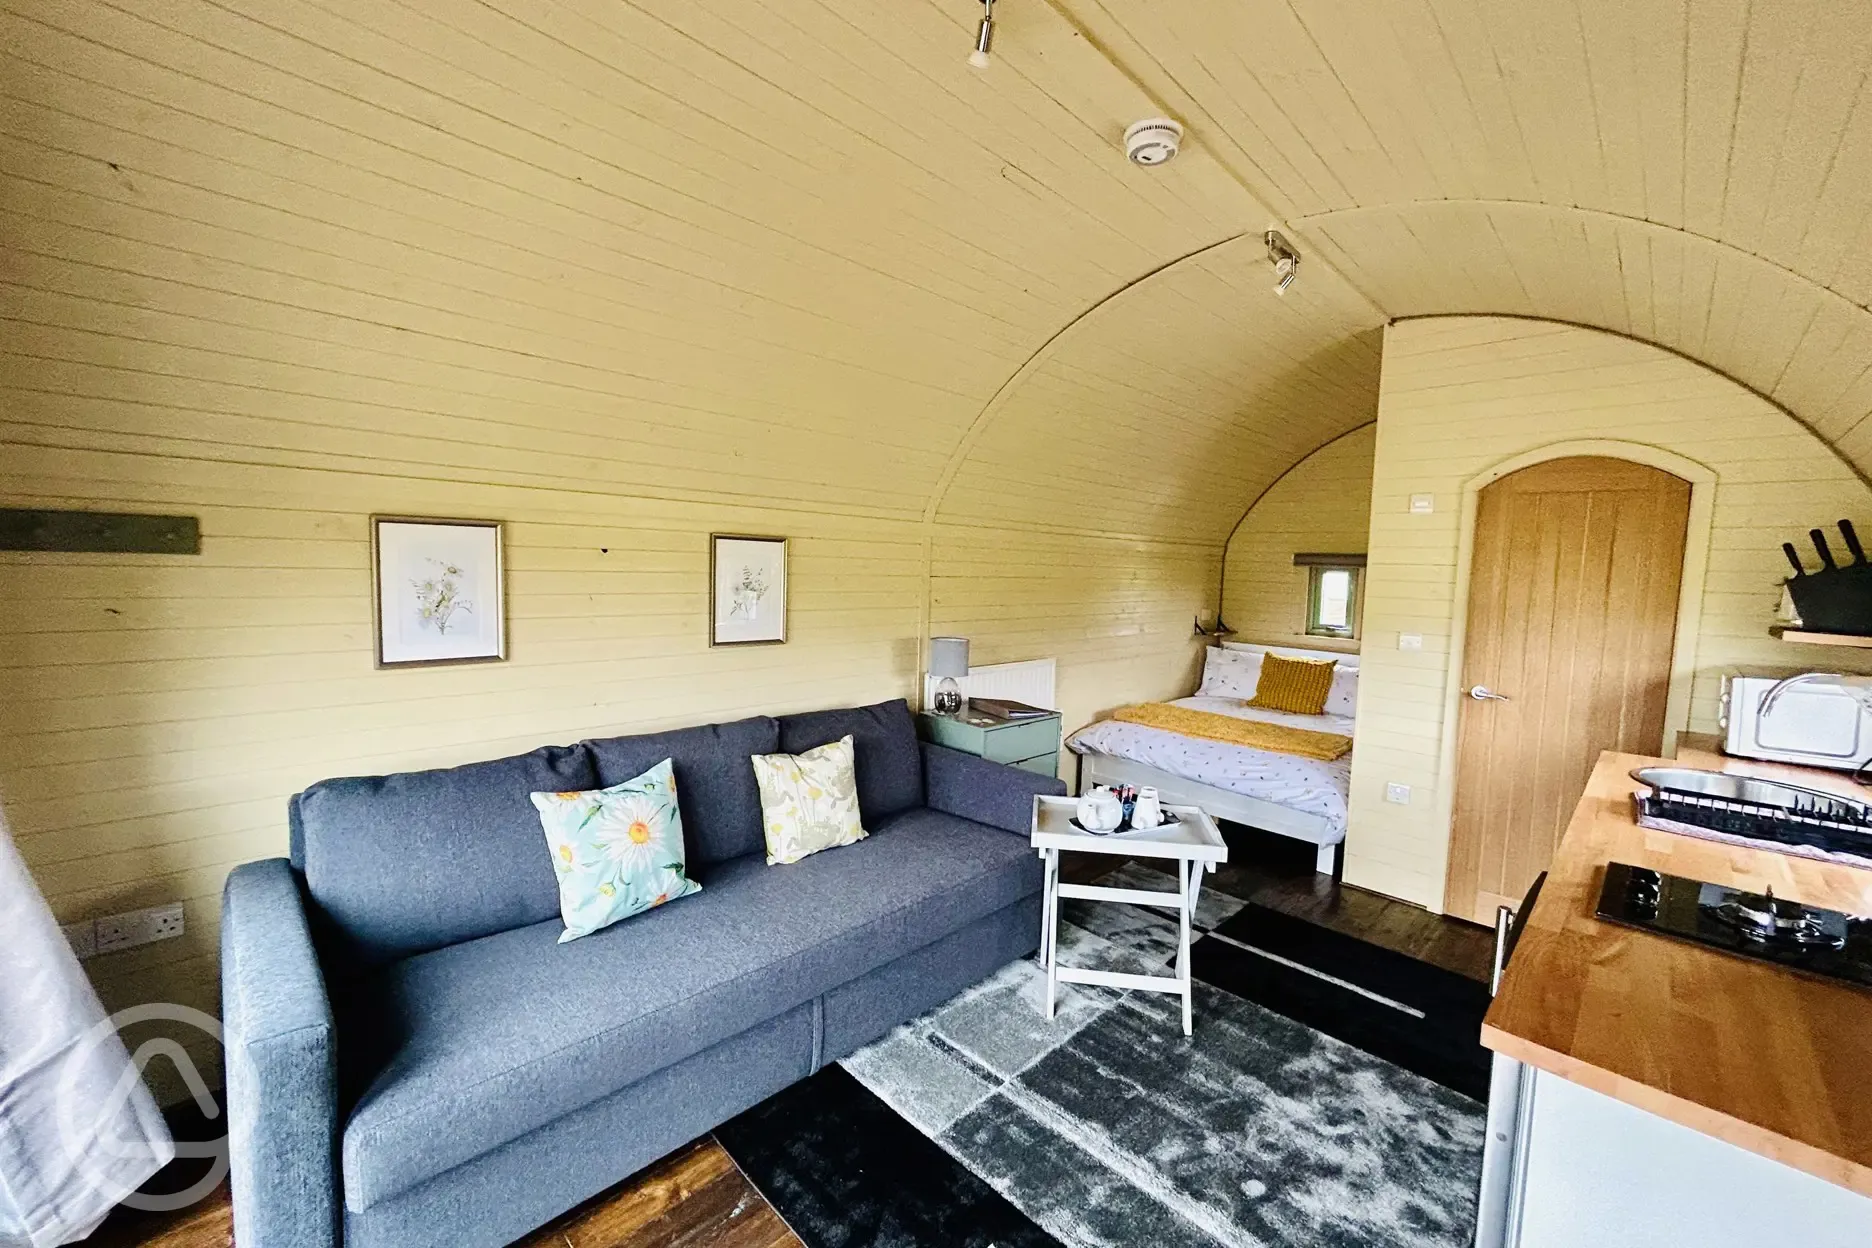 Glamping pod with hot tub interior